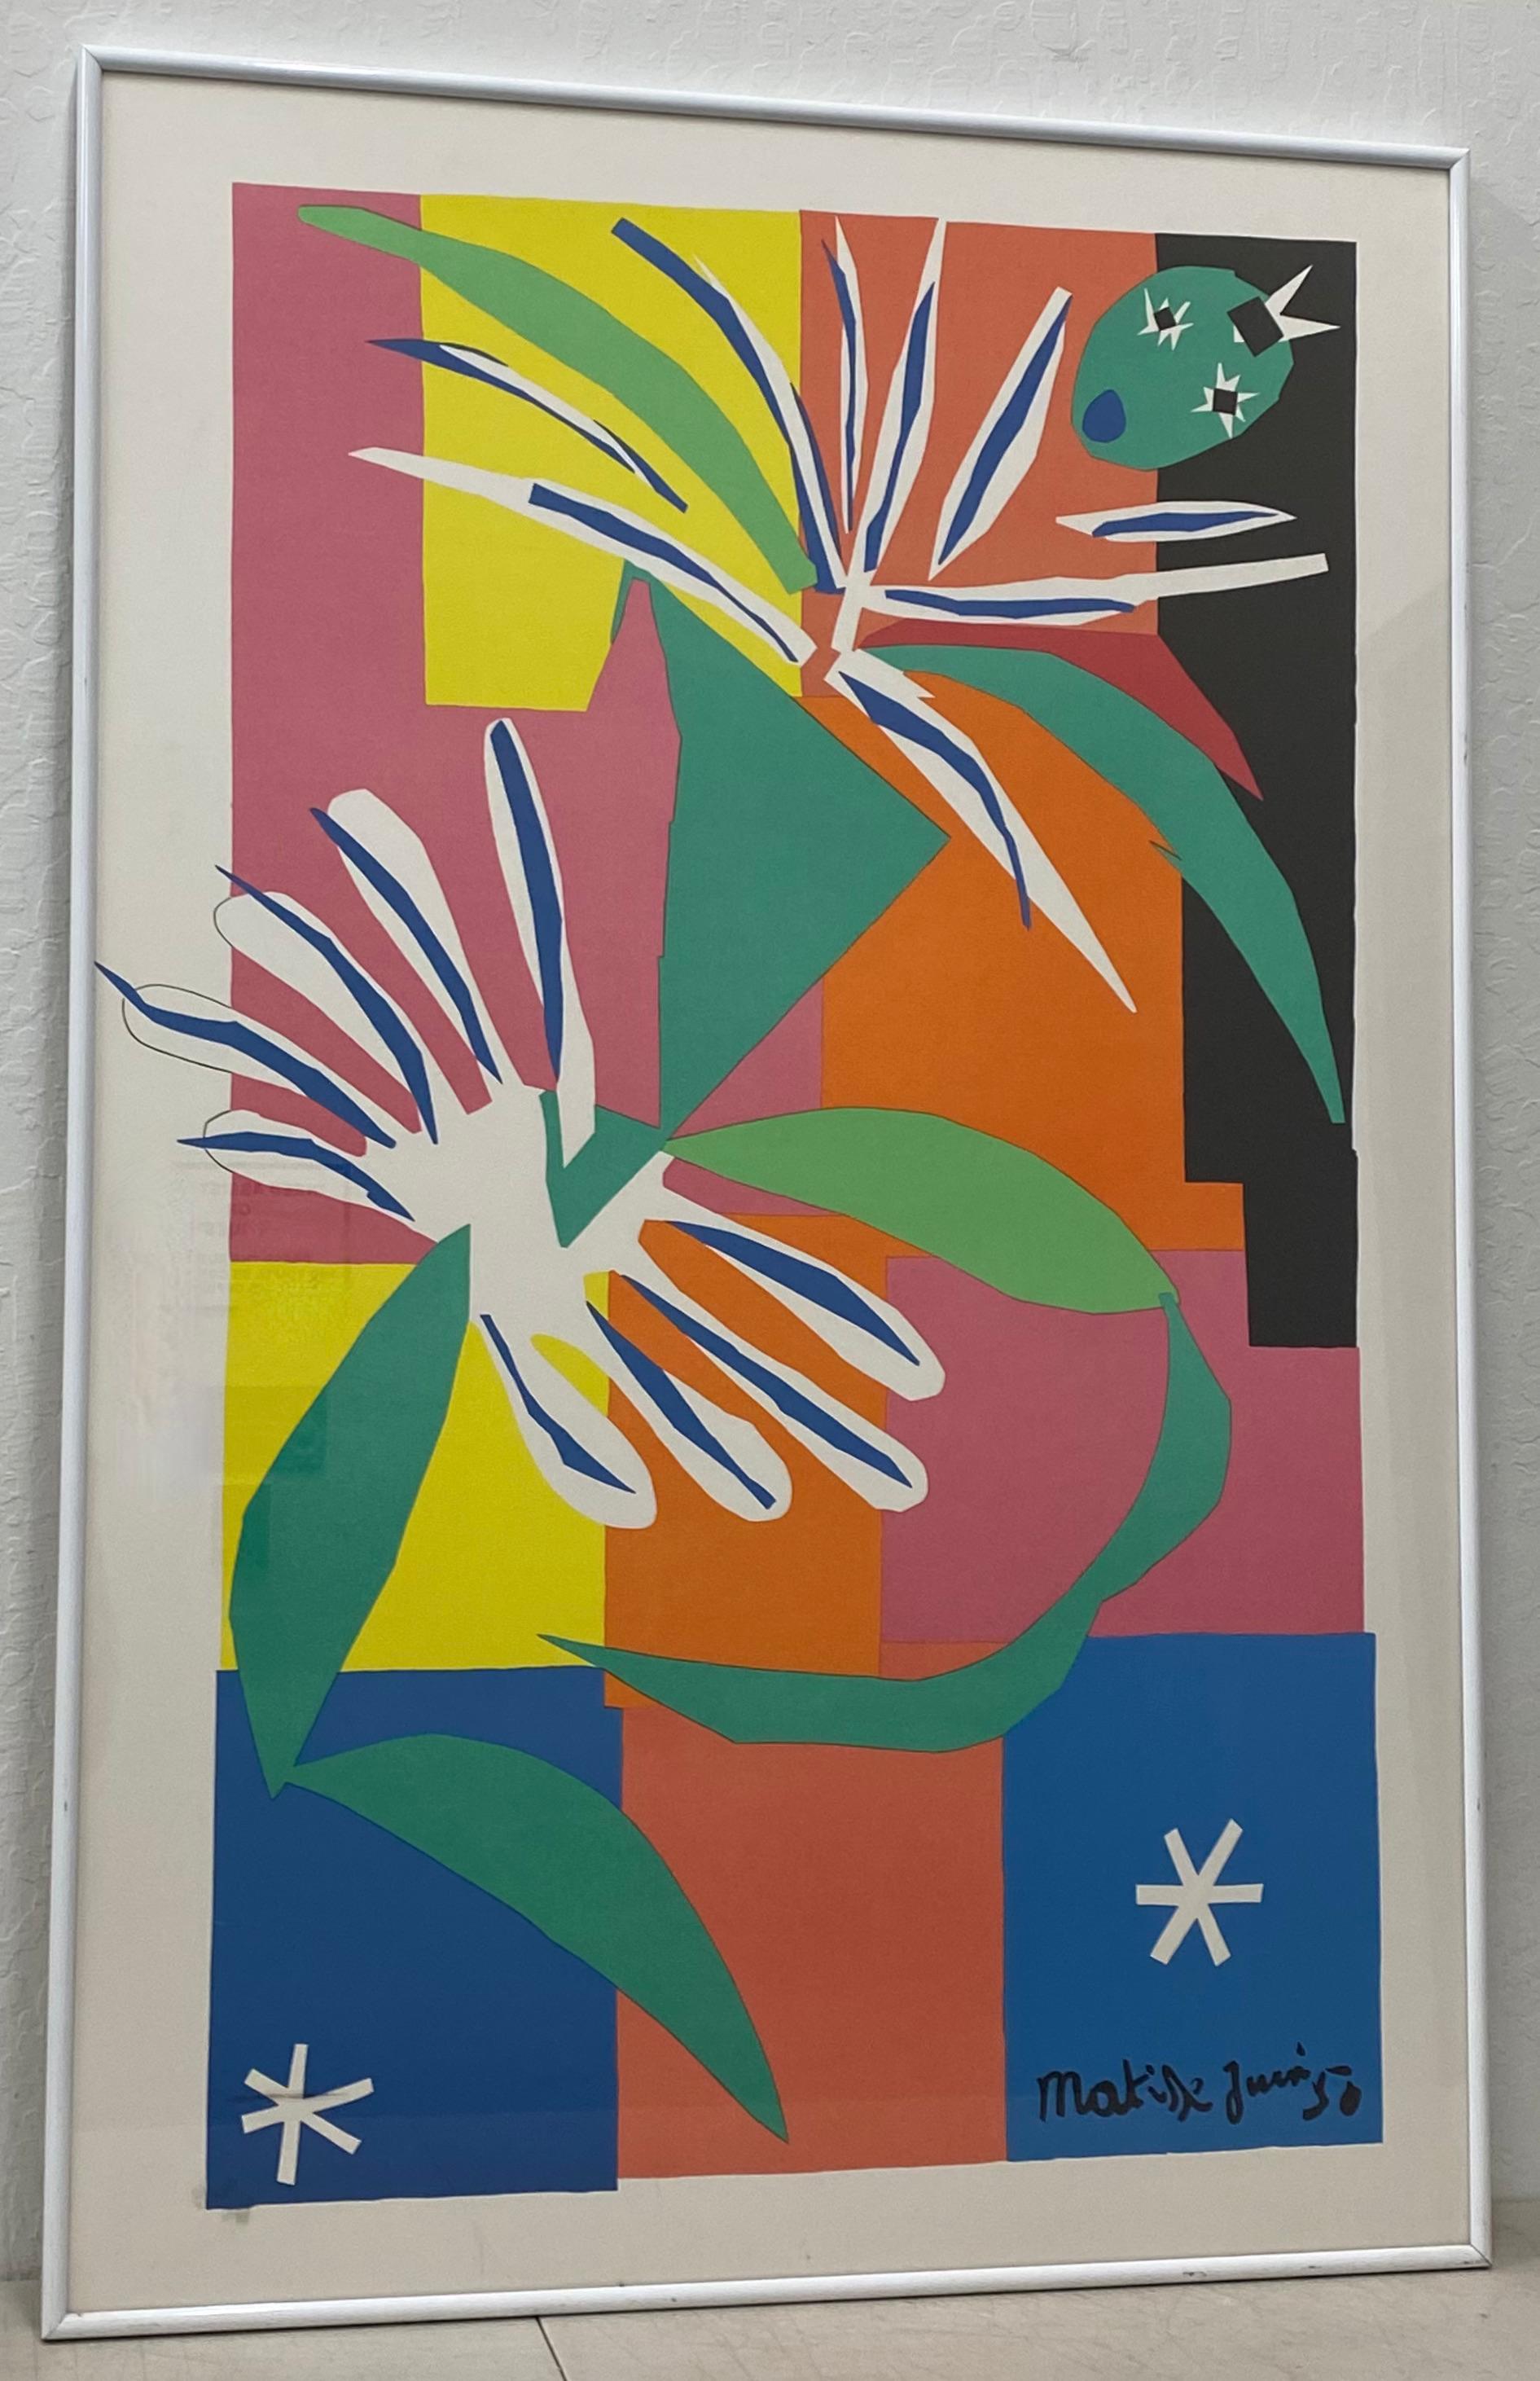 (after) Henri Matisse Abstract Print - After Henri Matisse "La Danseuse Creole" Framed Poster Late 20th Century